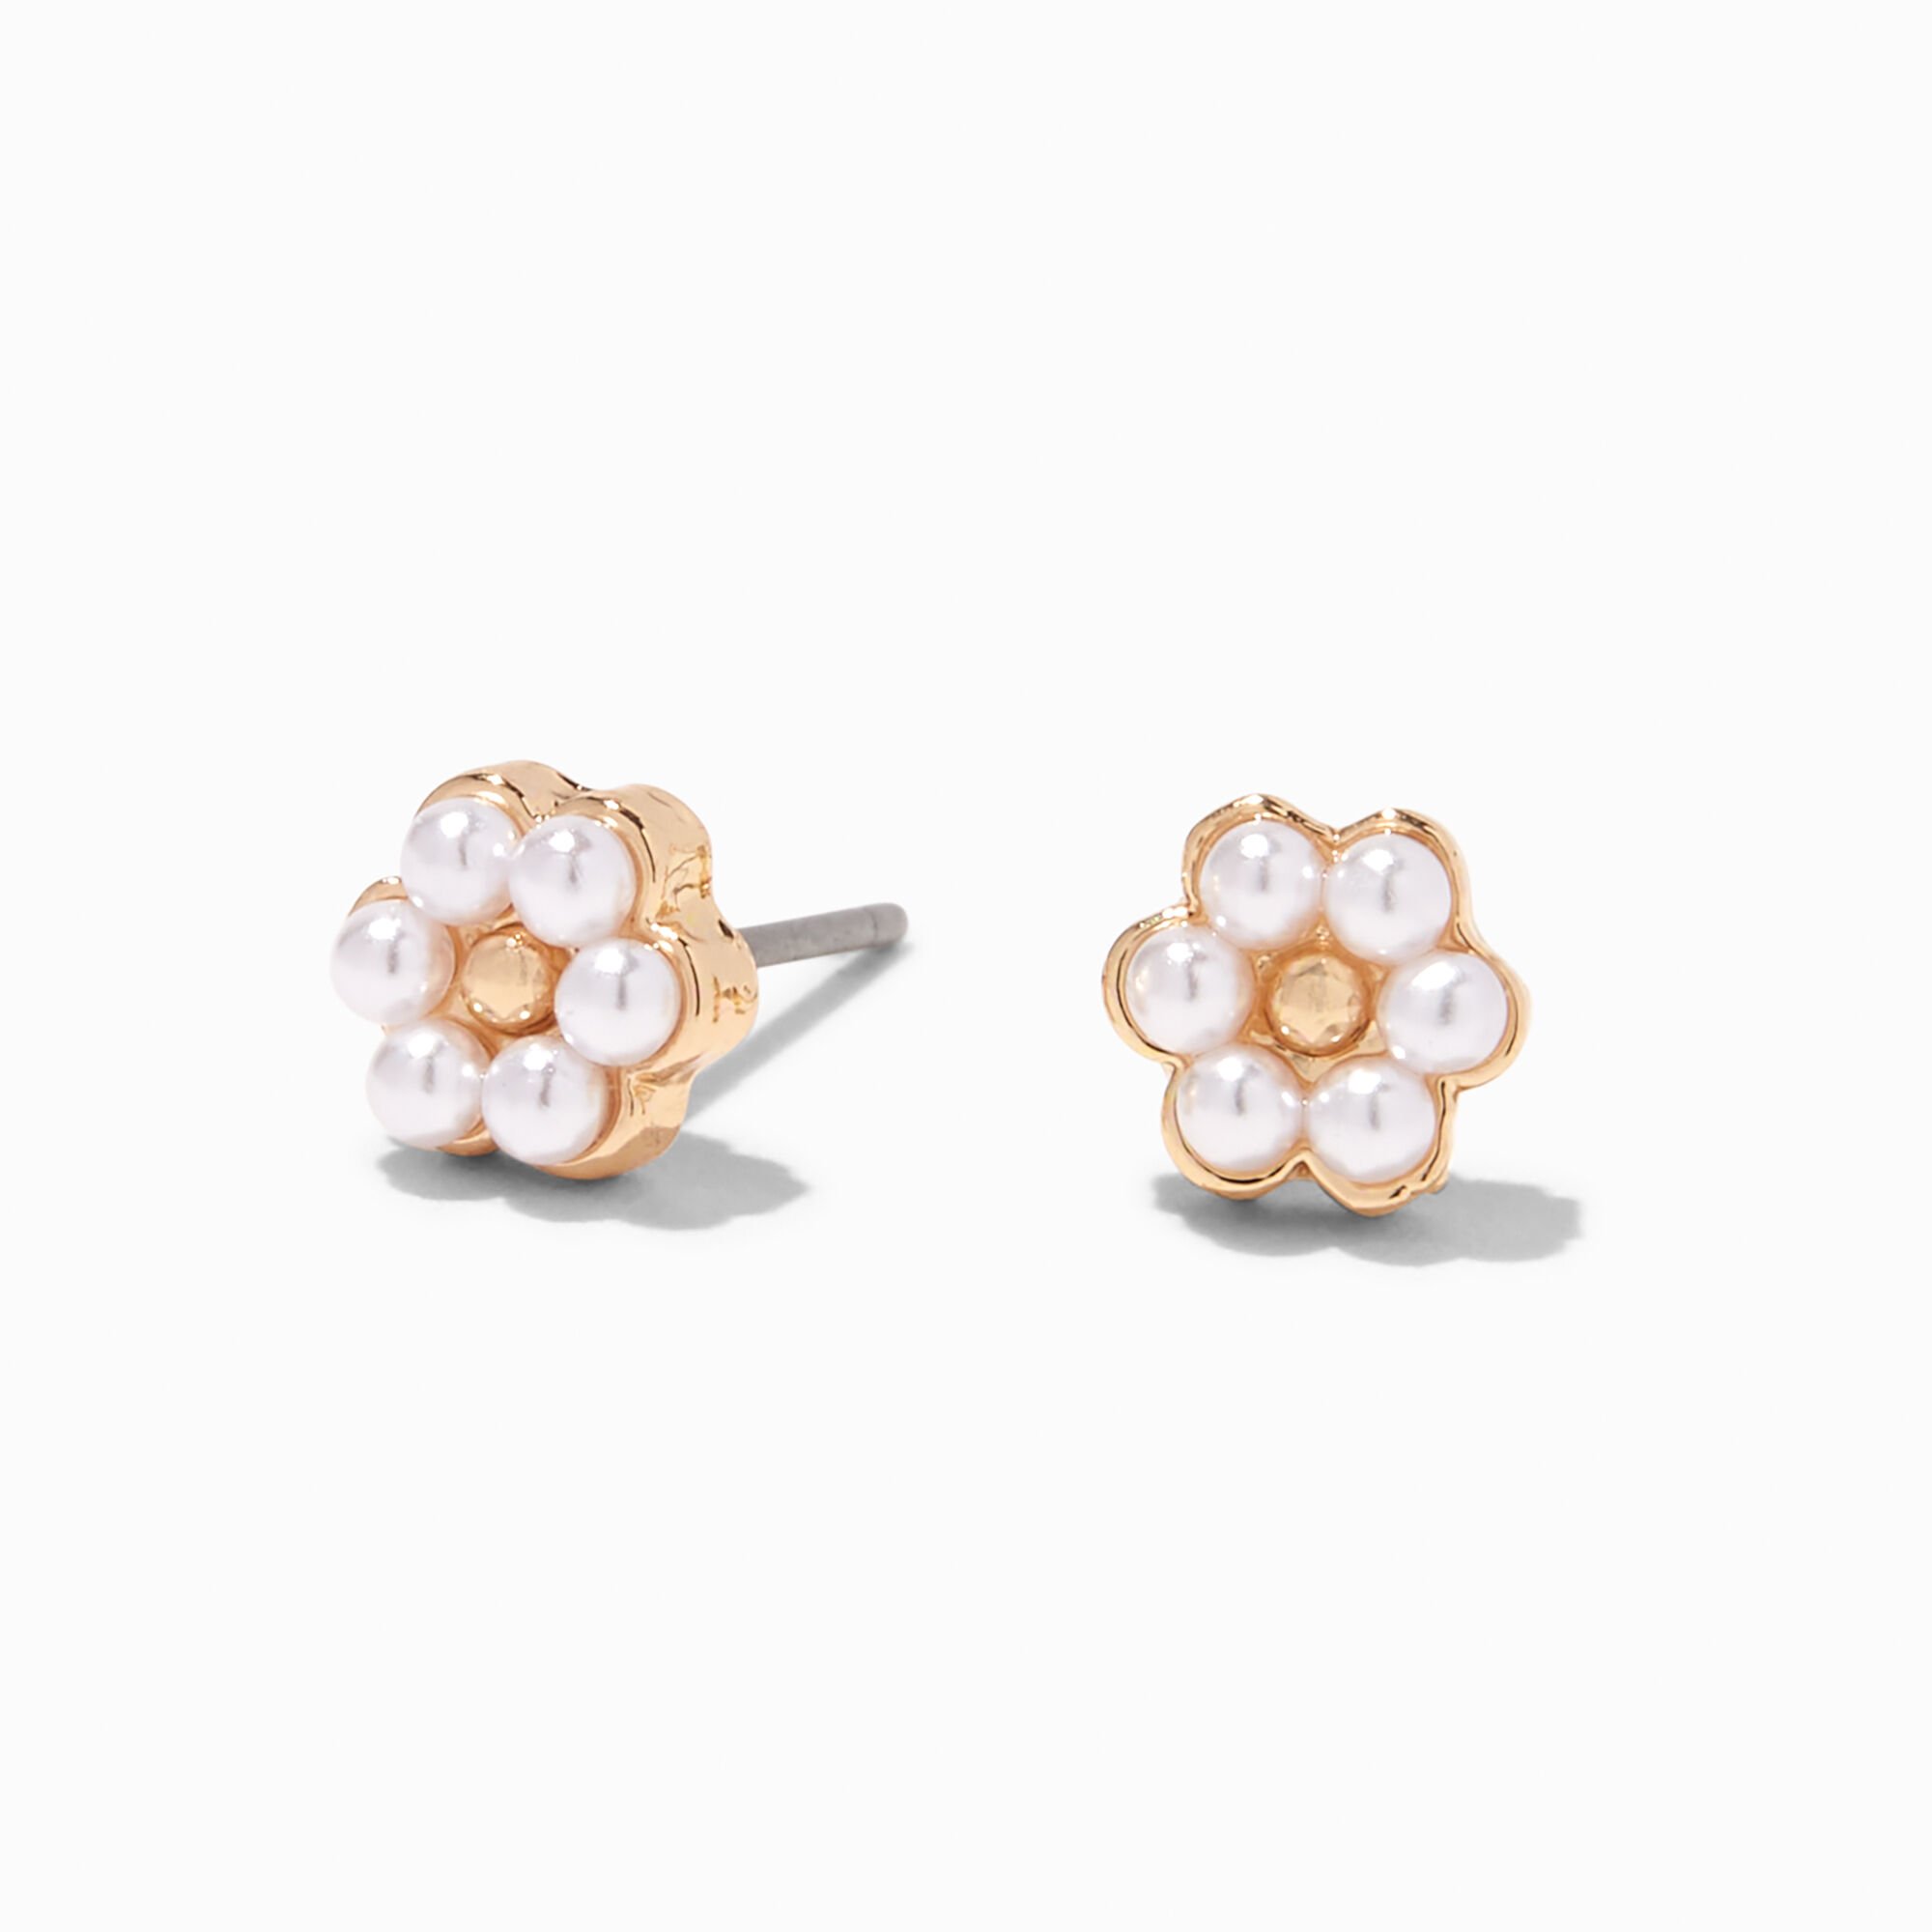 View Claires Tone Pearl Daisy Stud Earrings Gold information